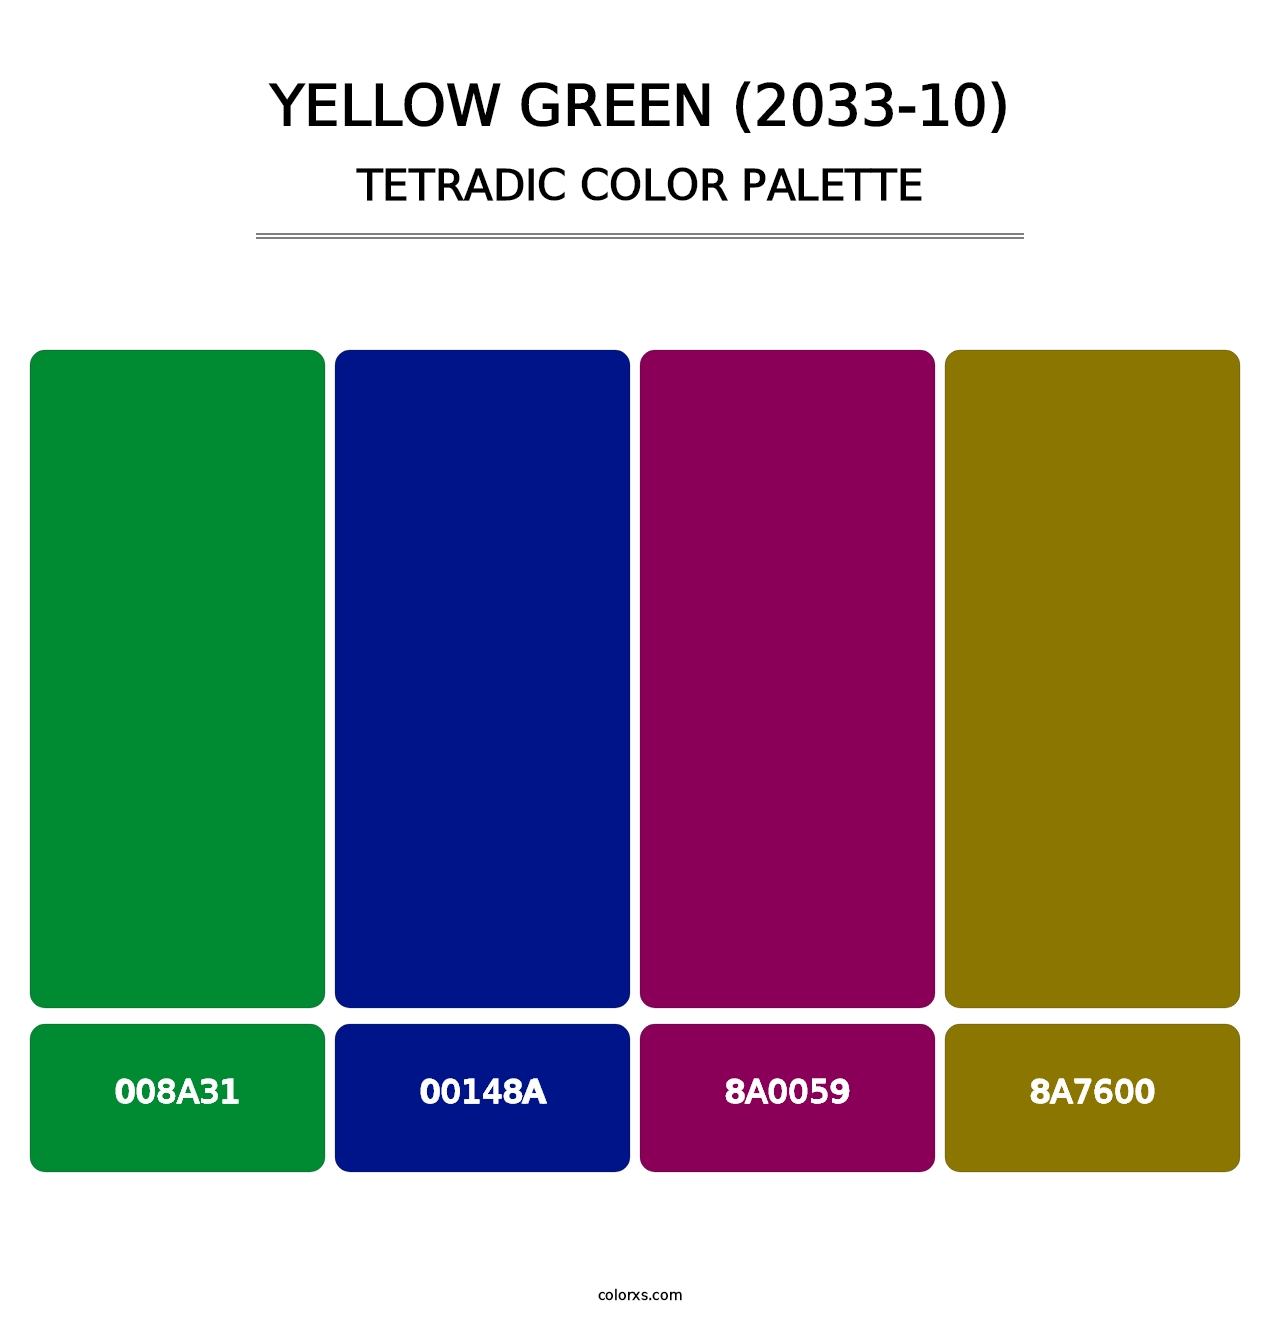 Yellow Green (2033-10) - Tetradic Color Palette